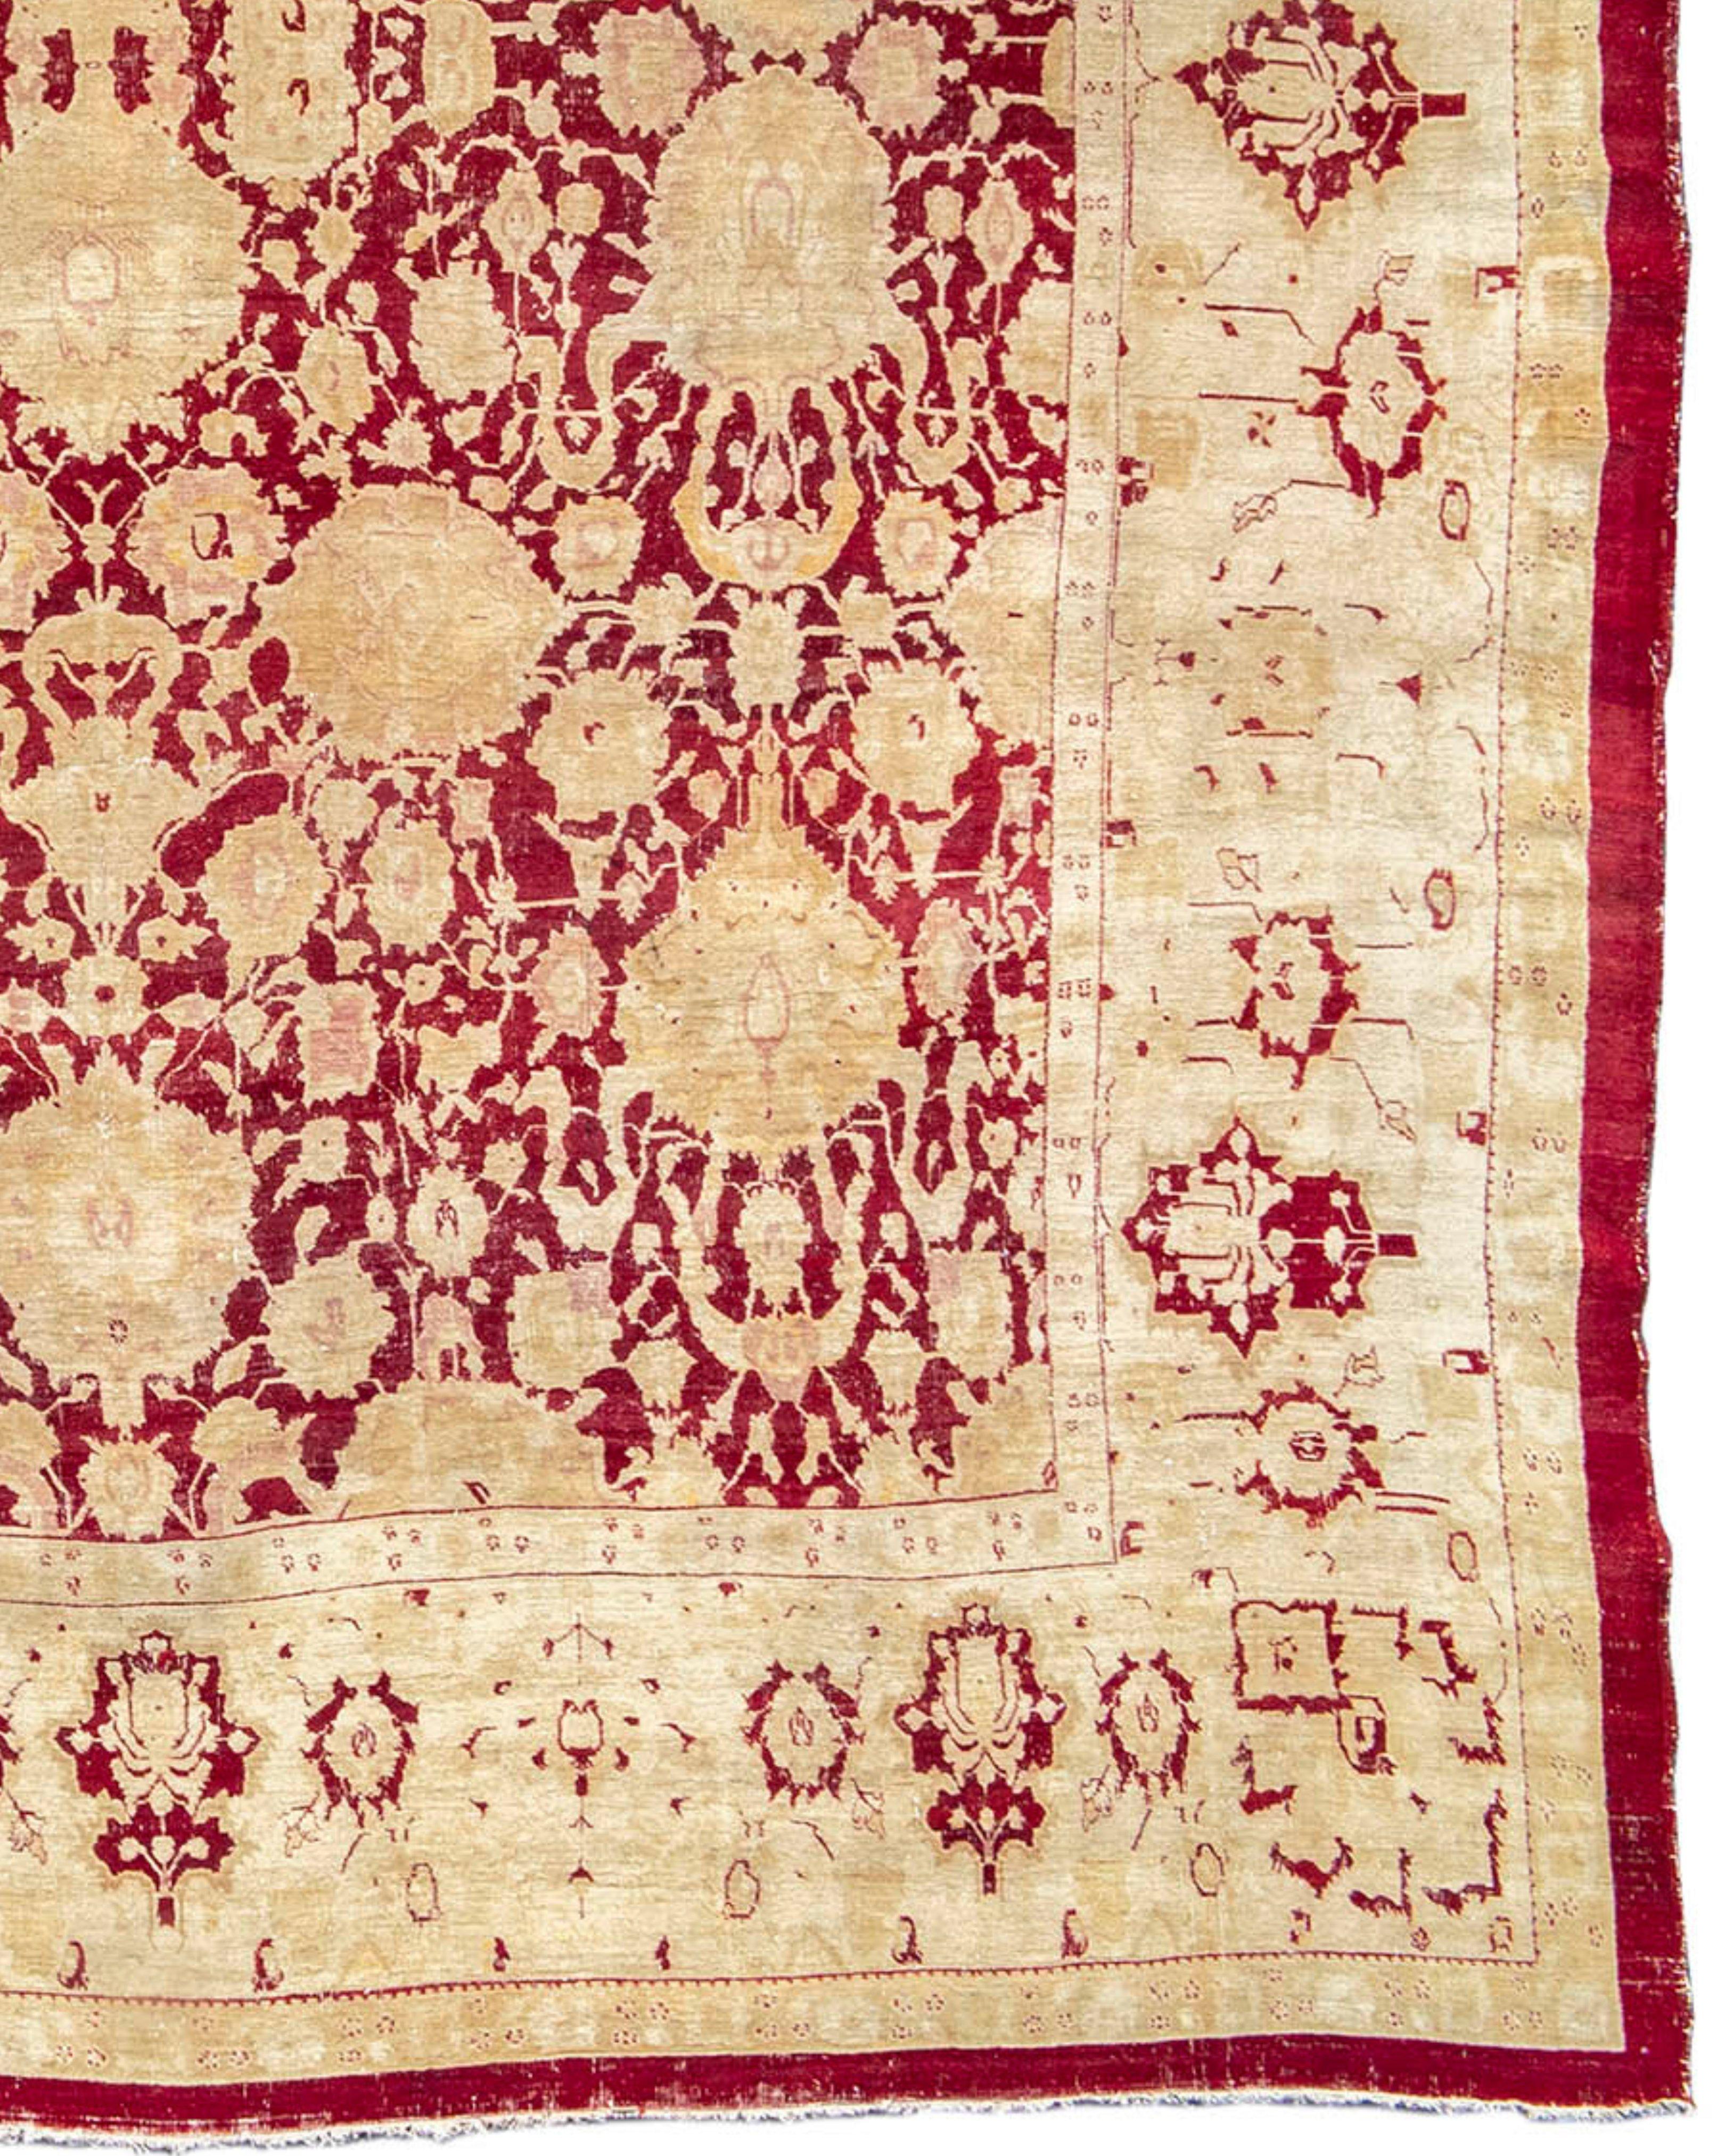 Antique Large Red and Gold Agra Carpet, Late 19th Century

Additional Information:
Dimensions: 13'3